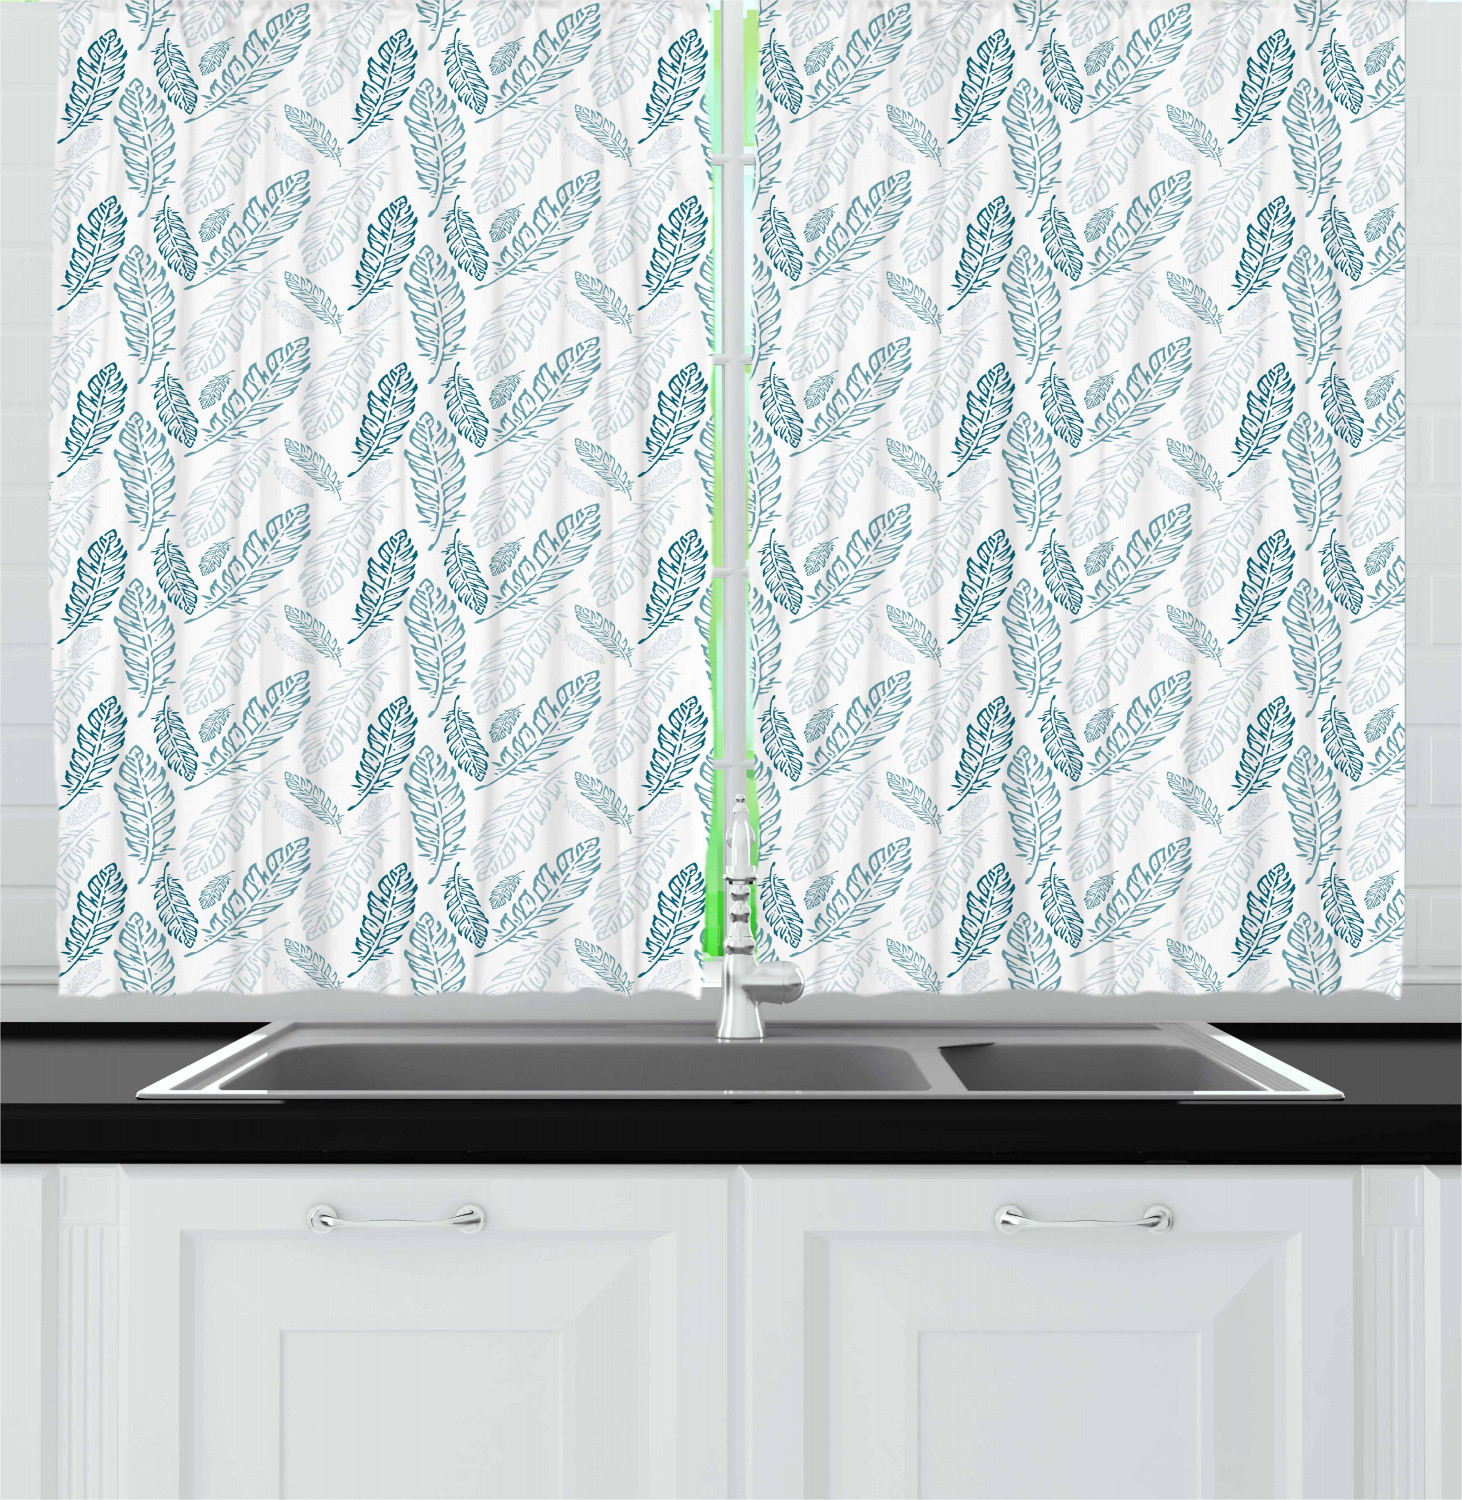 Teal Kitchen Curtains
 Teal and White Kitchen Curtains 2 Panel Set Window Drapes